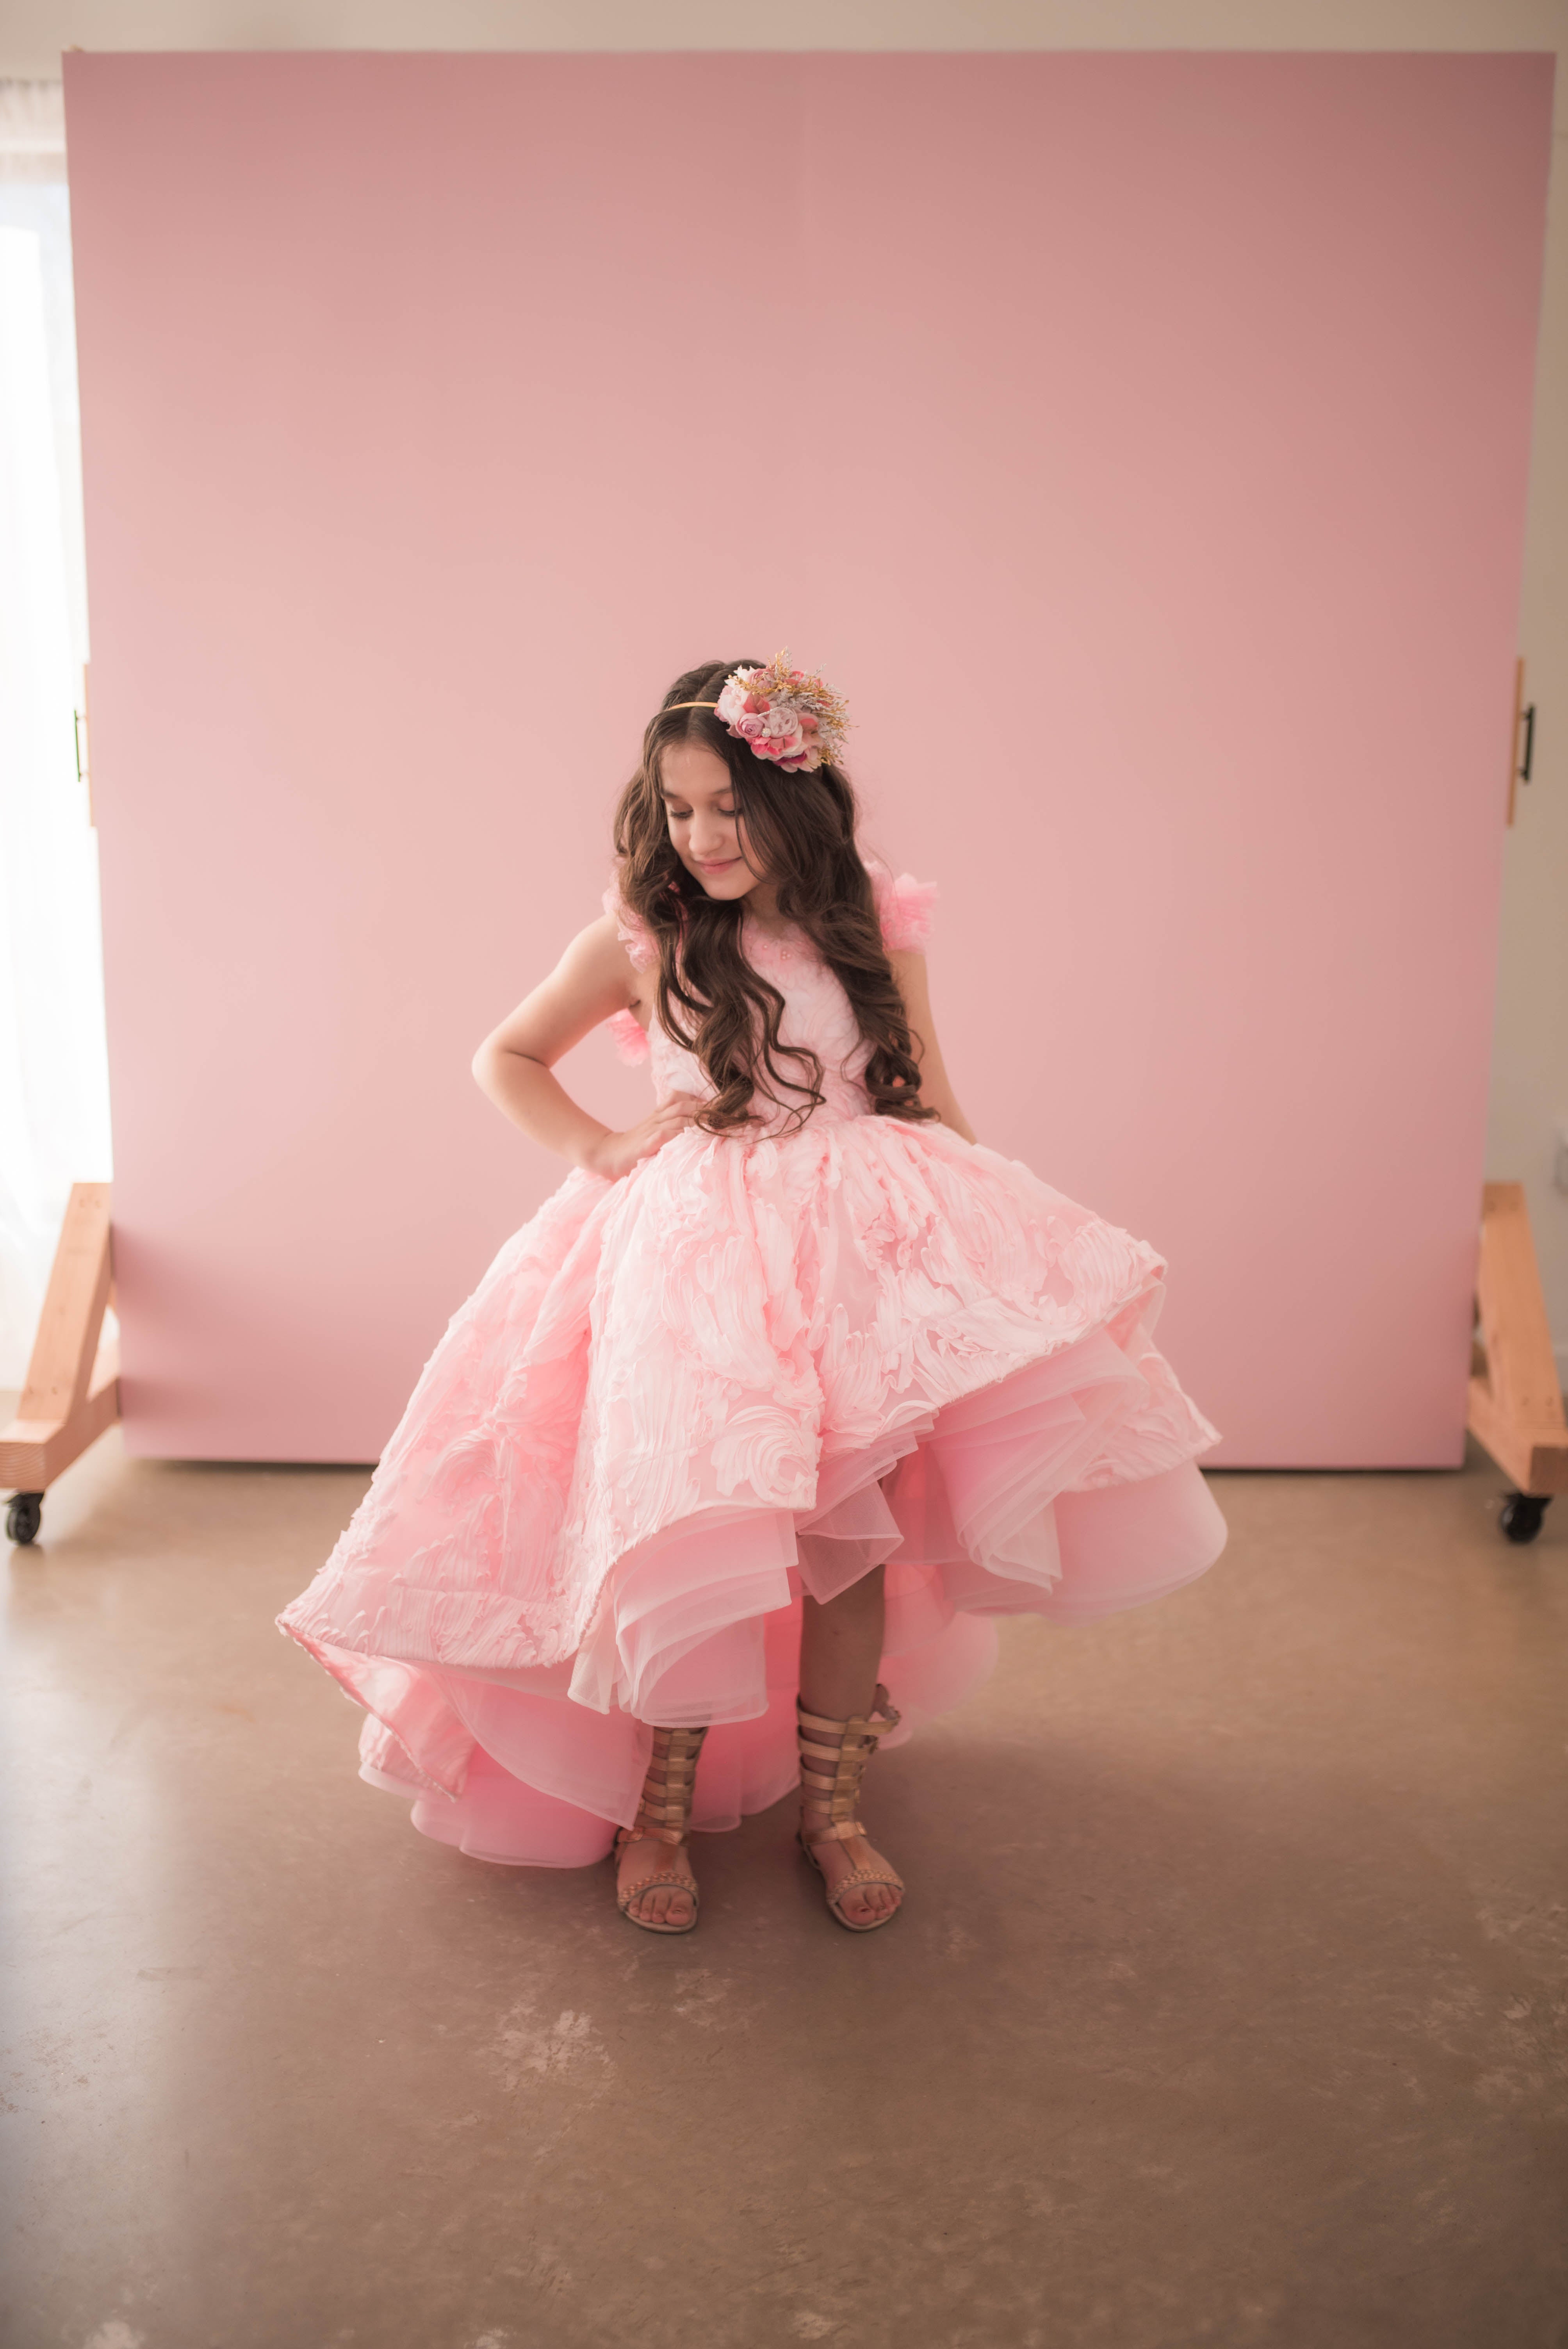 perfect pink gowns for photo shoots